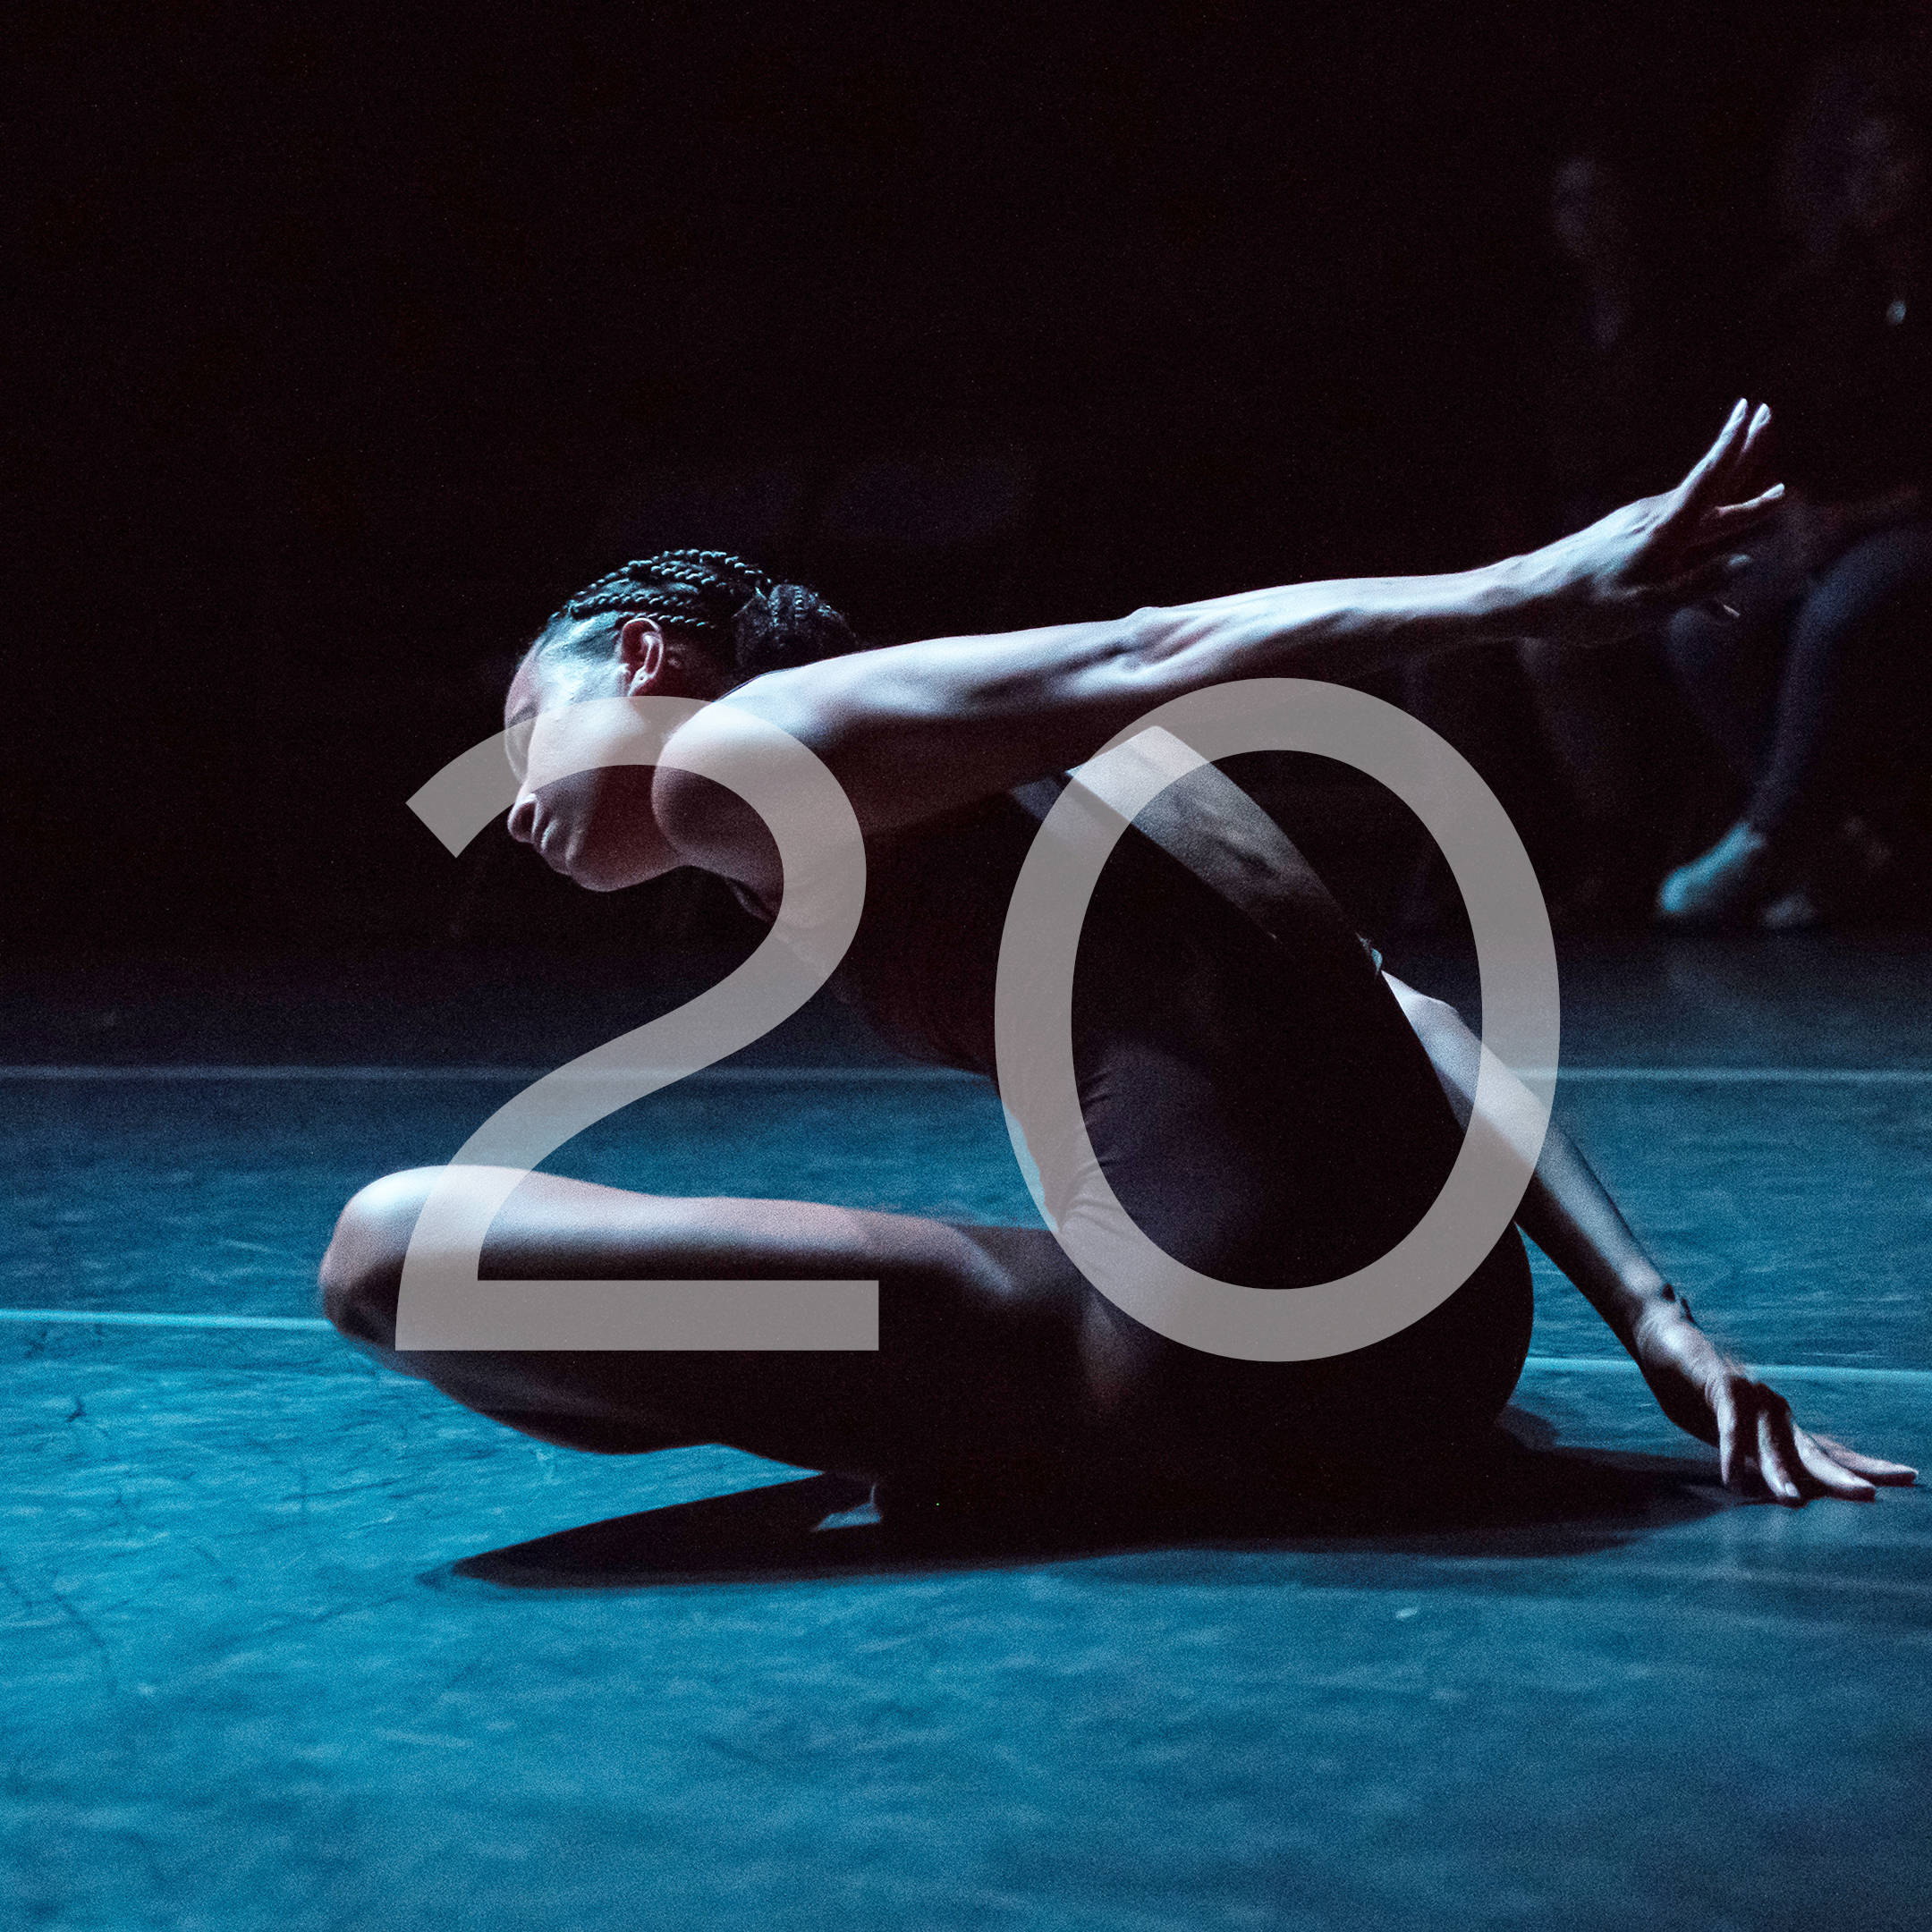 push/FOLD Dancer Ashely Morton performing her solo in the world premiere 'Ash' from Union PDX - Festival:19 at the Hampton Opera Center in Portland, Oregon. The number 20 overlays the image to indicate the Festival:20 year. | Photography: Jingzi Zhao